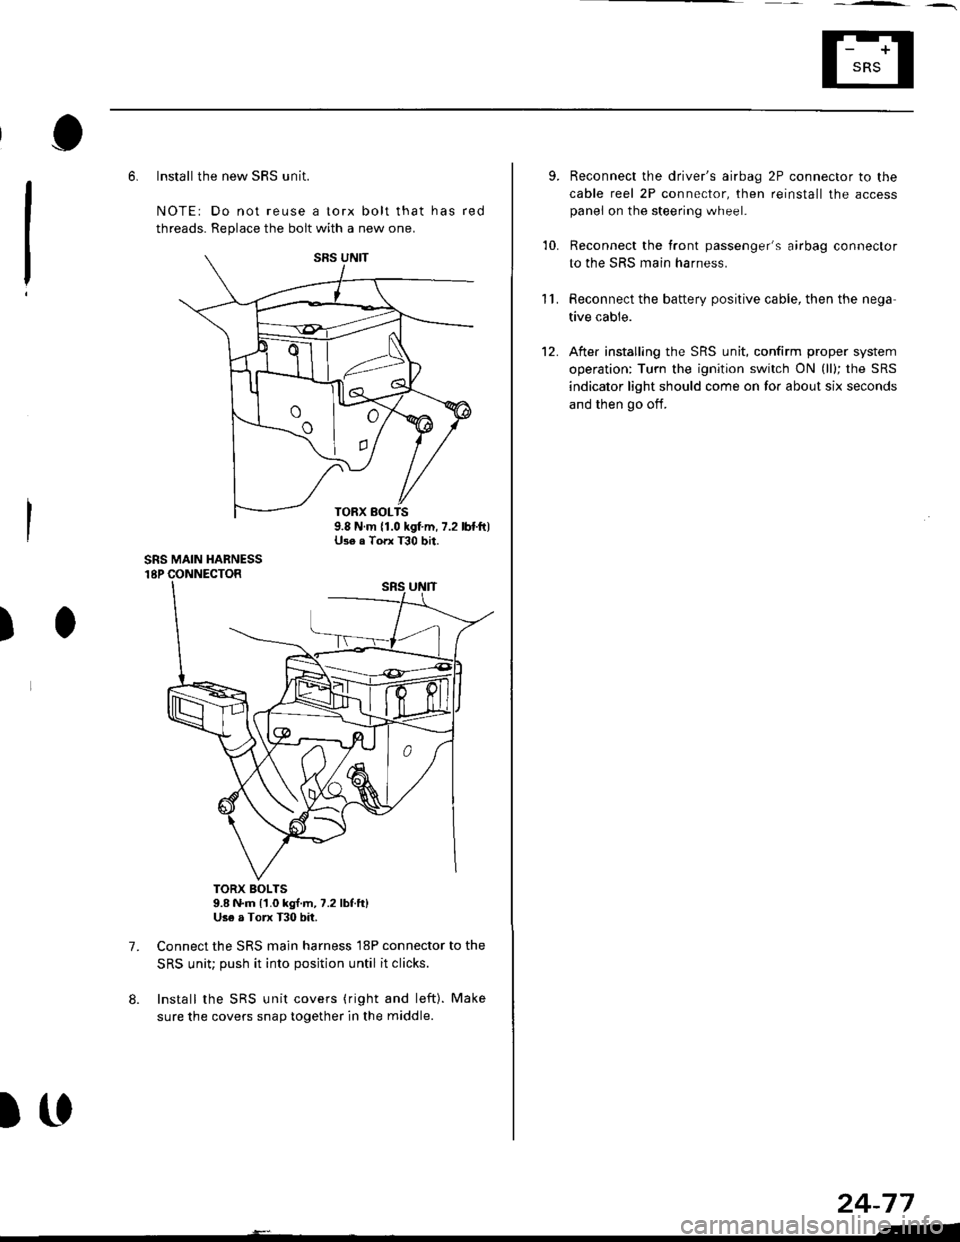 HONDA CIVIC 1996 6.G Manual PDF 6. Install the new SRS unit.
NOTE: Do not reuse a torx bolt that has red
threads. Replace the bolt with a new one.
)
7.
TORX BOLTS9.8 N.m l1.0 kg{.m, 7.2 lbf.ft}Use a Torx T30 bit.
Connect the SRS ma